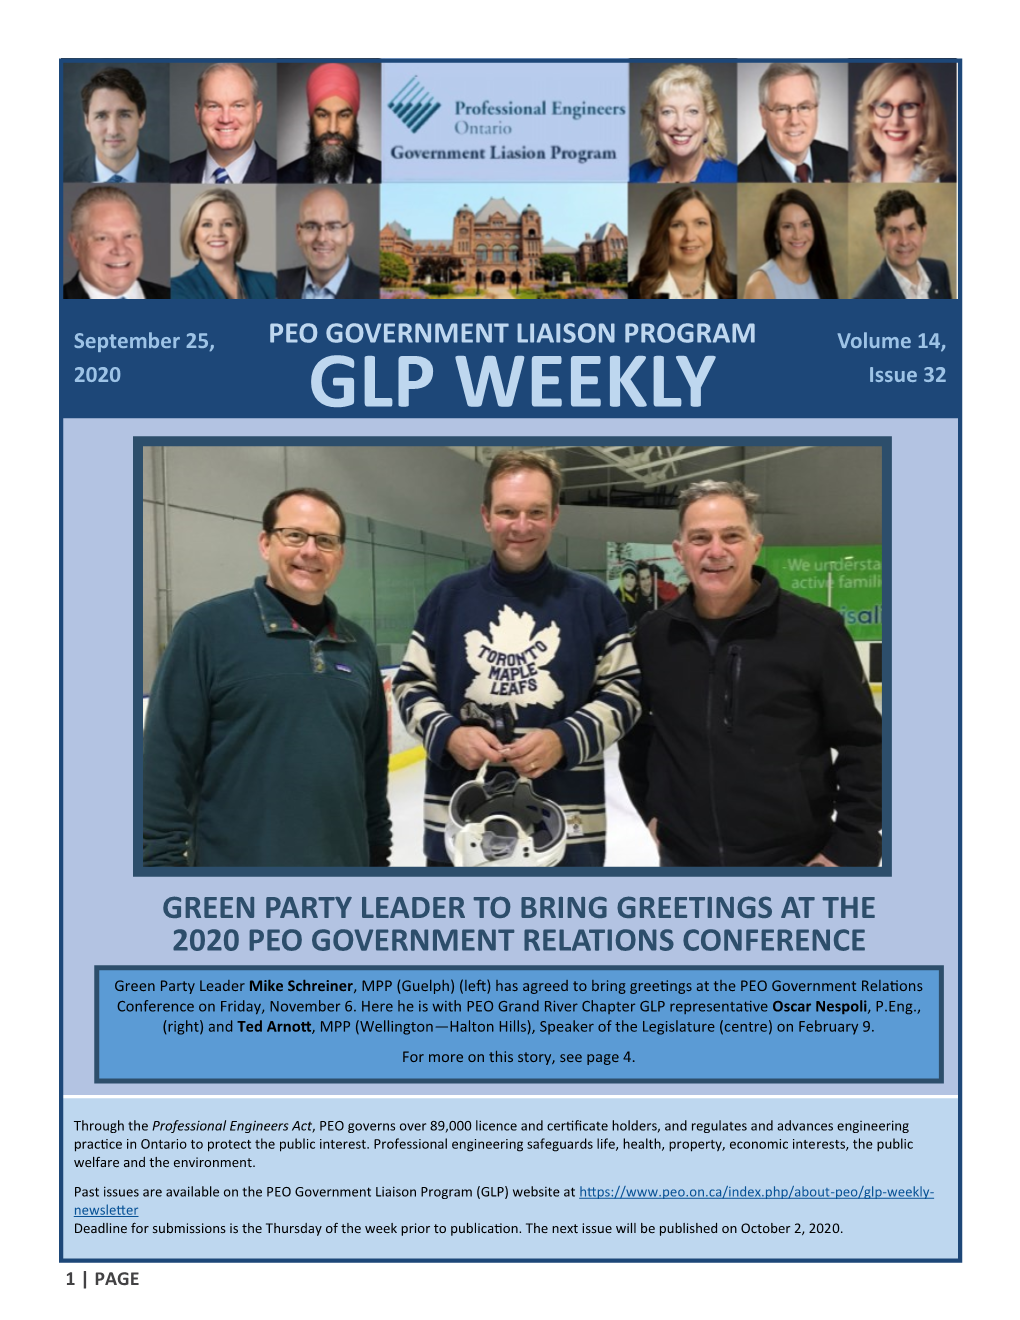 GLP WEEKLY Issue 32